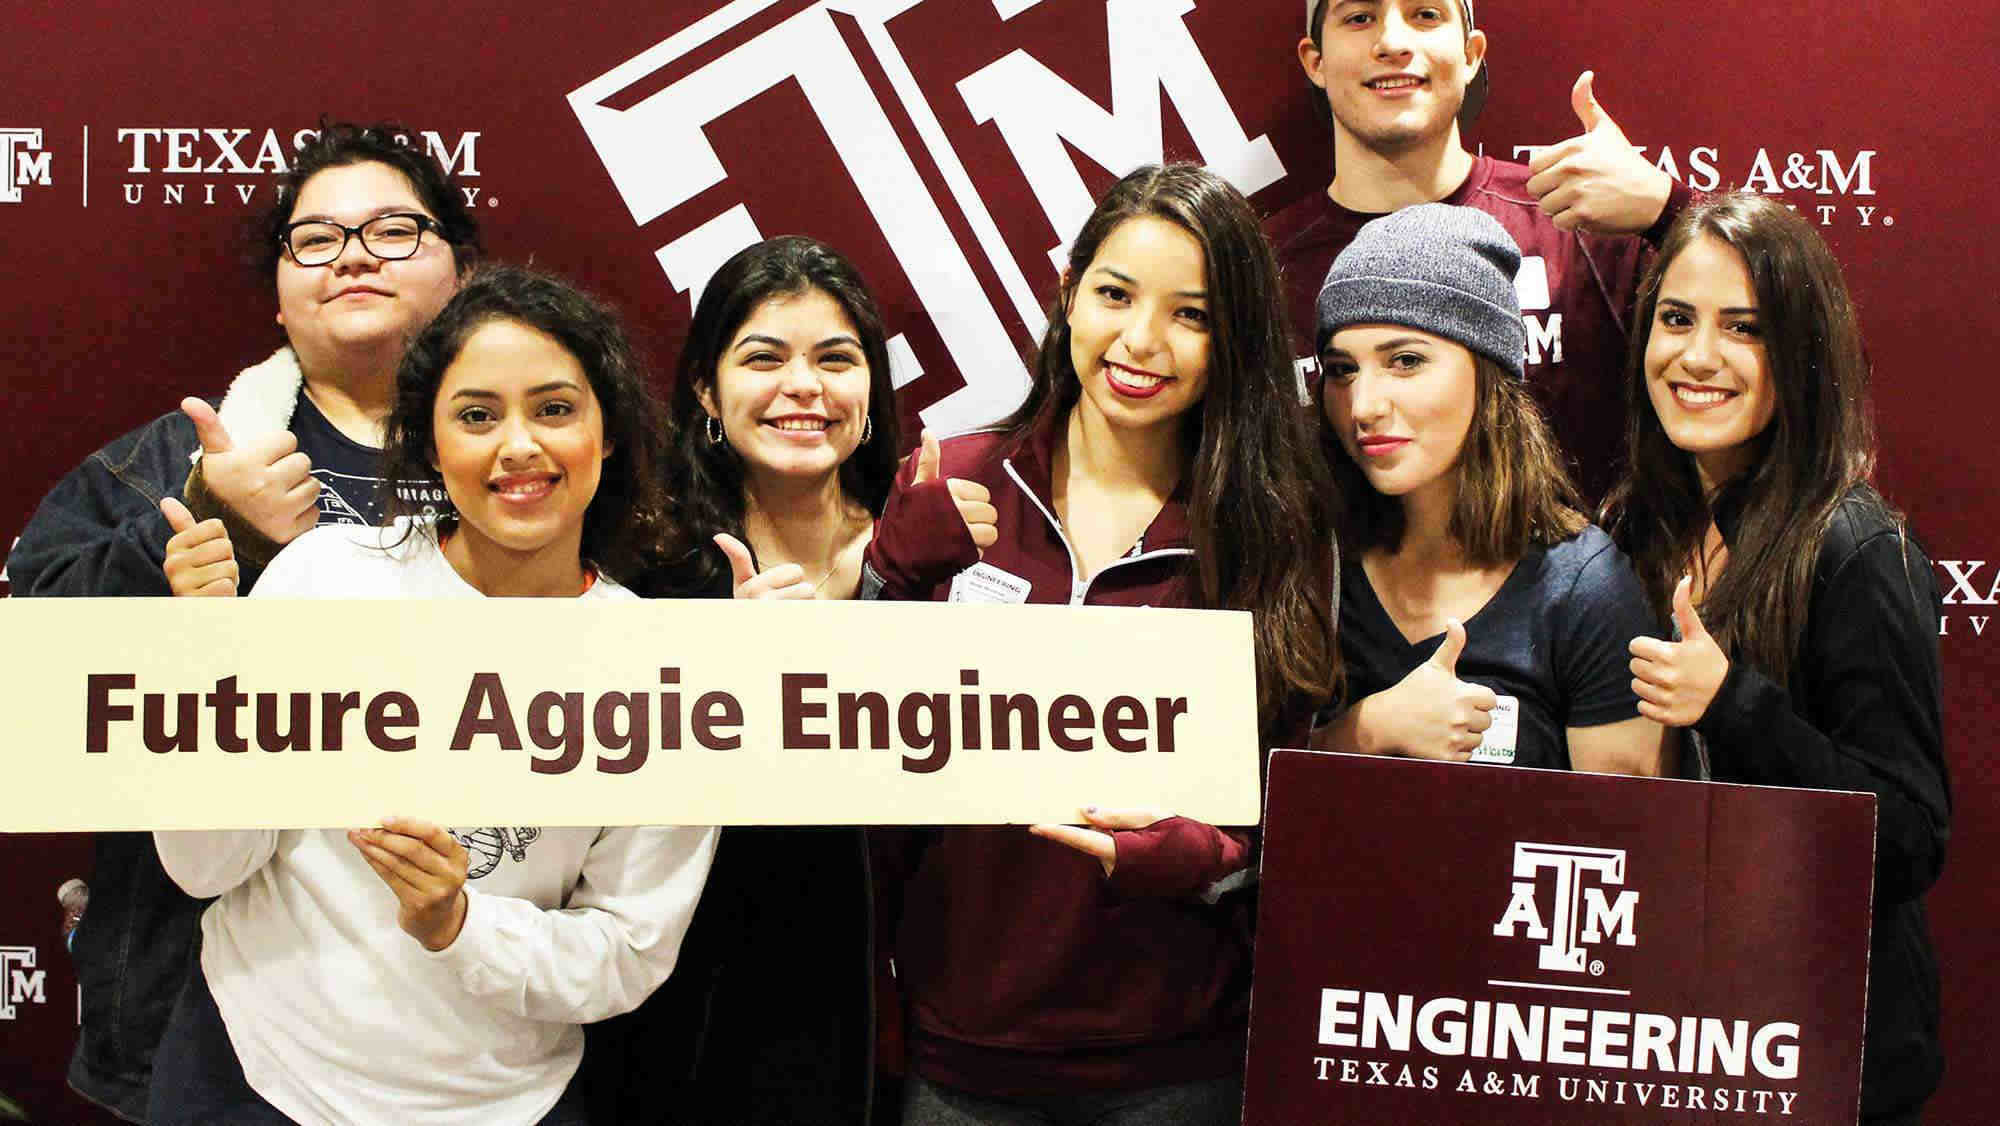 Texas A&M University in the background with seven students with their thumbs up holding a sign that says Future Aggie Engineers and Engineering Texas A&M University